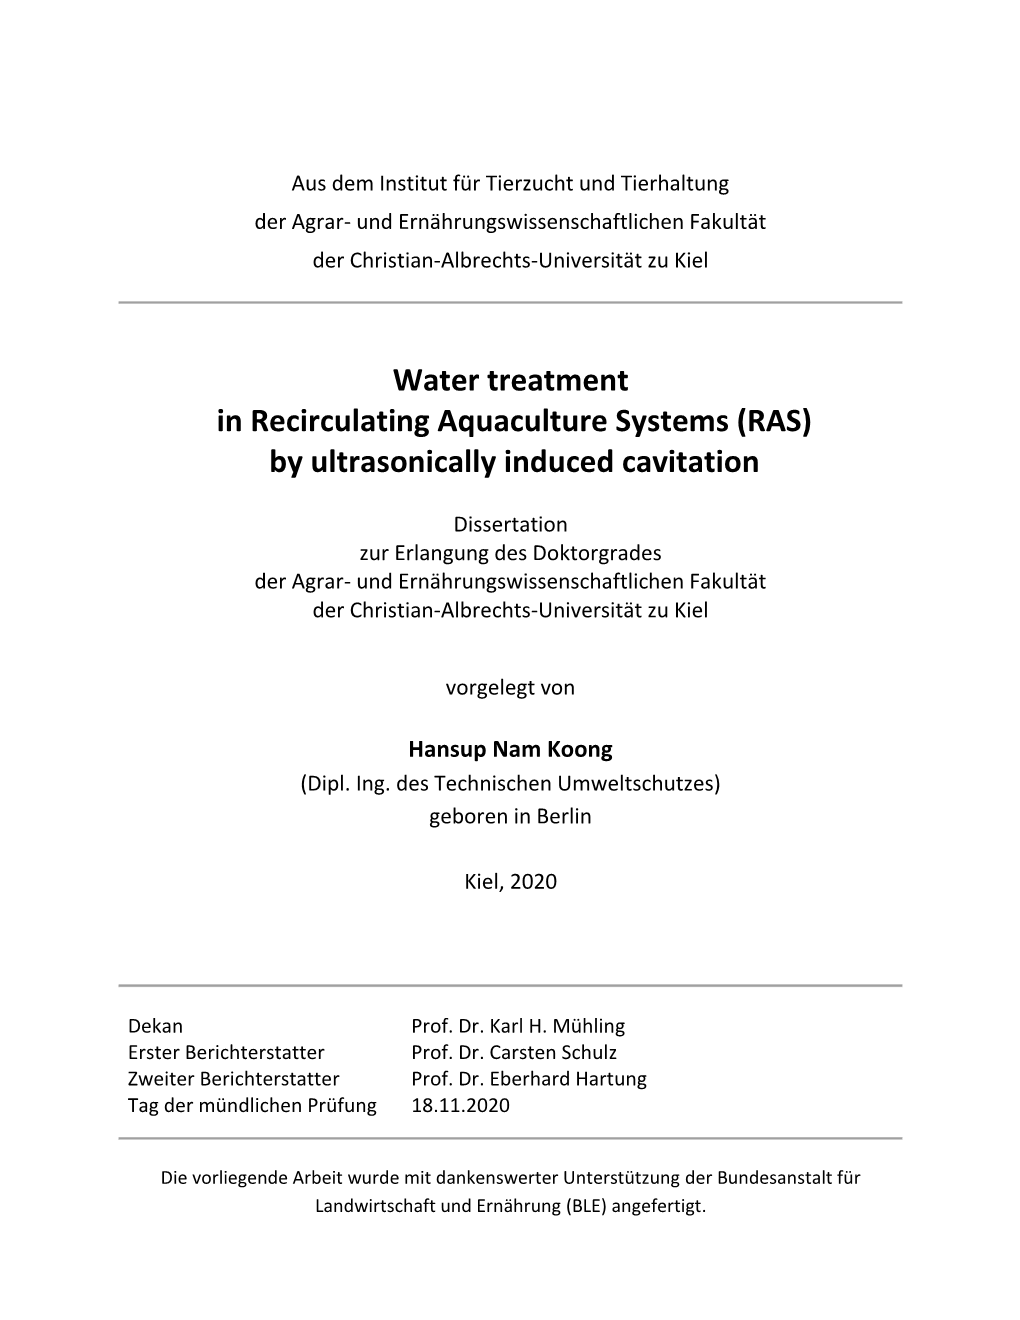 Water Treatment in Recirculating Aquaculture Systems (RAS) by Ultrasonically Induced Cavitation